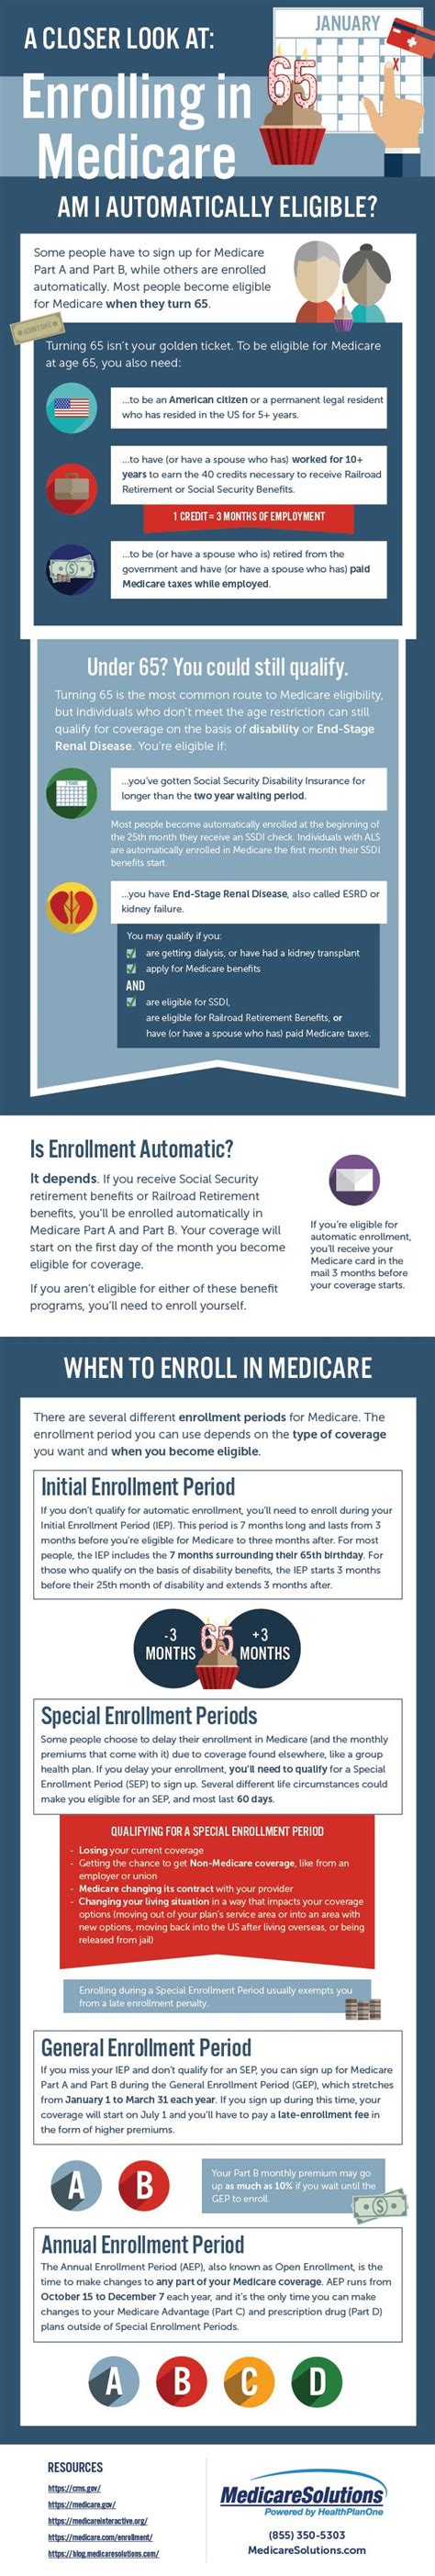 Enrolling In Medicare Infographic Turning 65 Is The Most Common Route